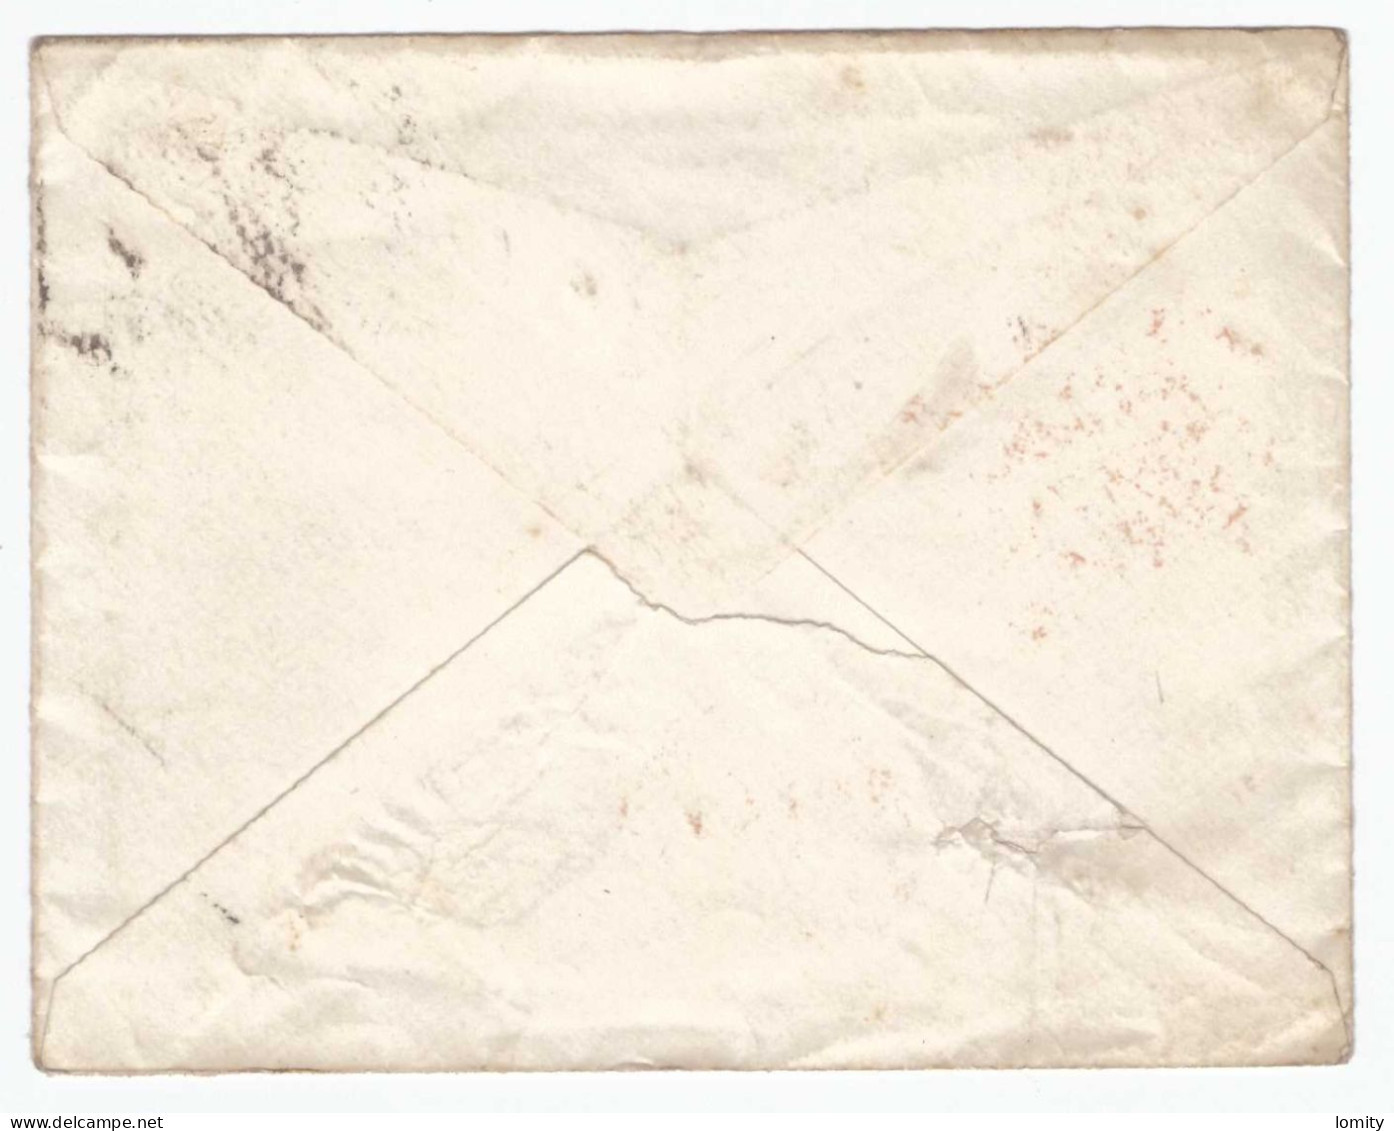 Inde 1878 Lettre Letter Cover  Bombay Via Brindisi Affranchissement Six Annas , Cachet Rouge Paid London - 1858-79 Crown Colony